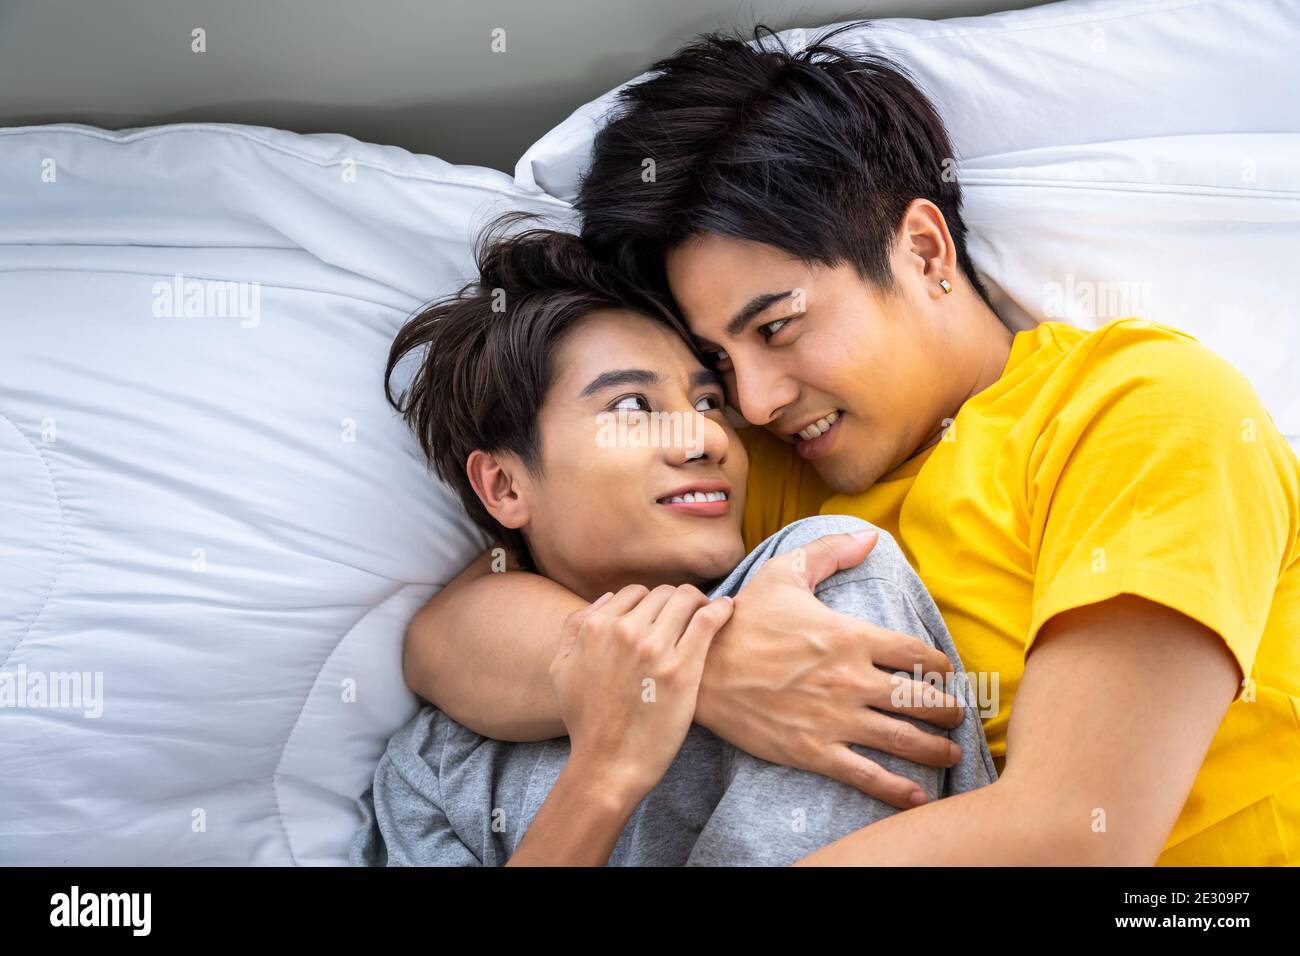 Happy Asian homosexual gay men male couple lying and embracing on bed. LGBT and sexual diversity concept. Stock Photo